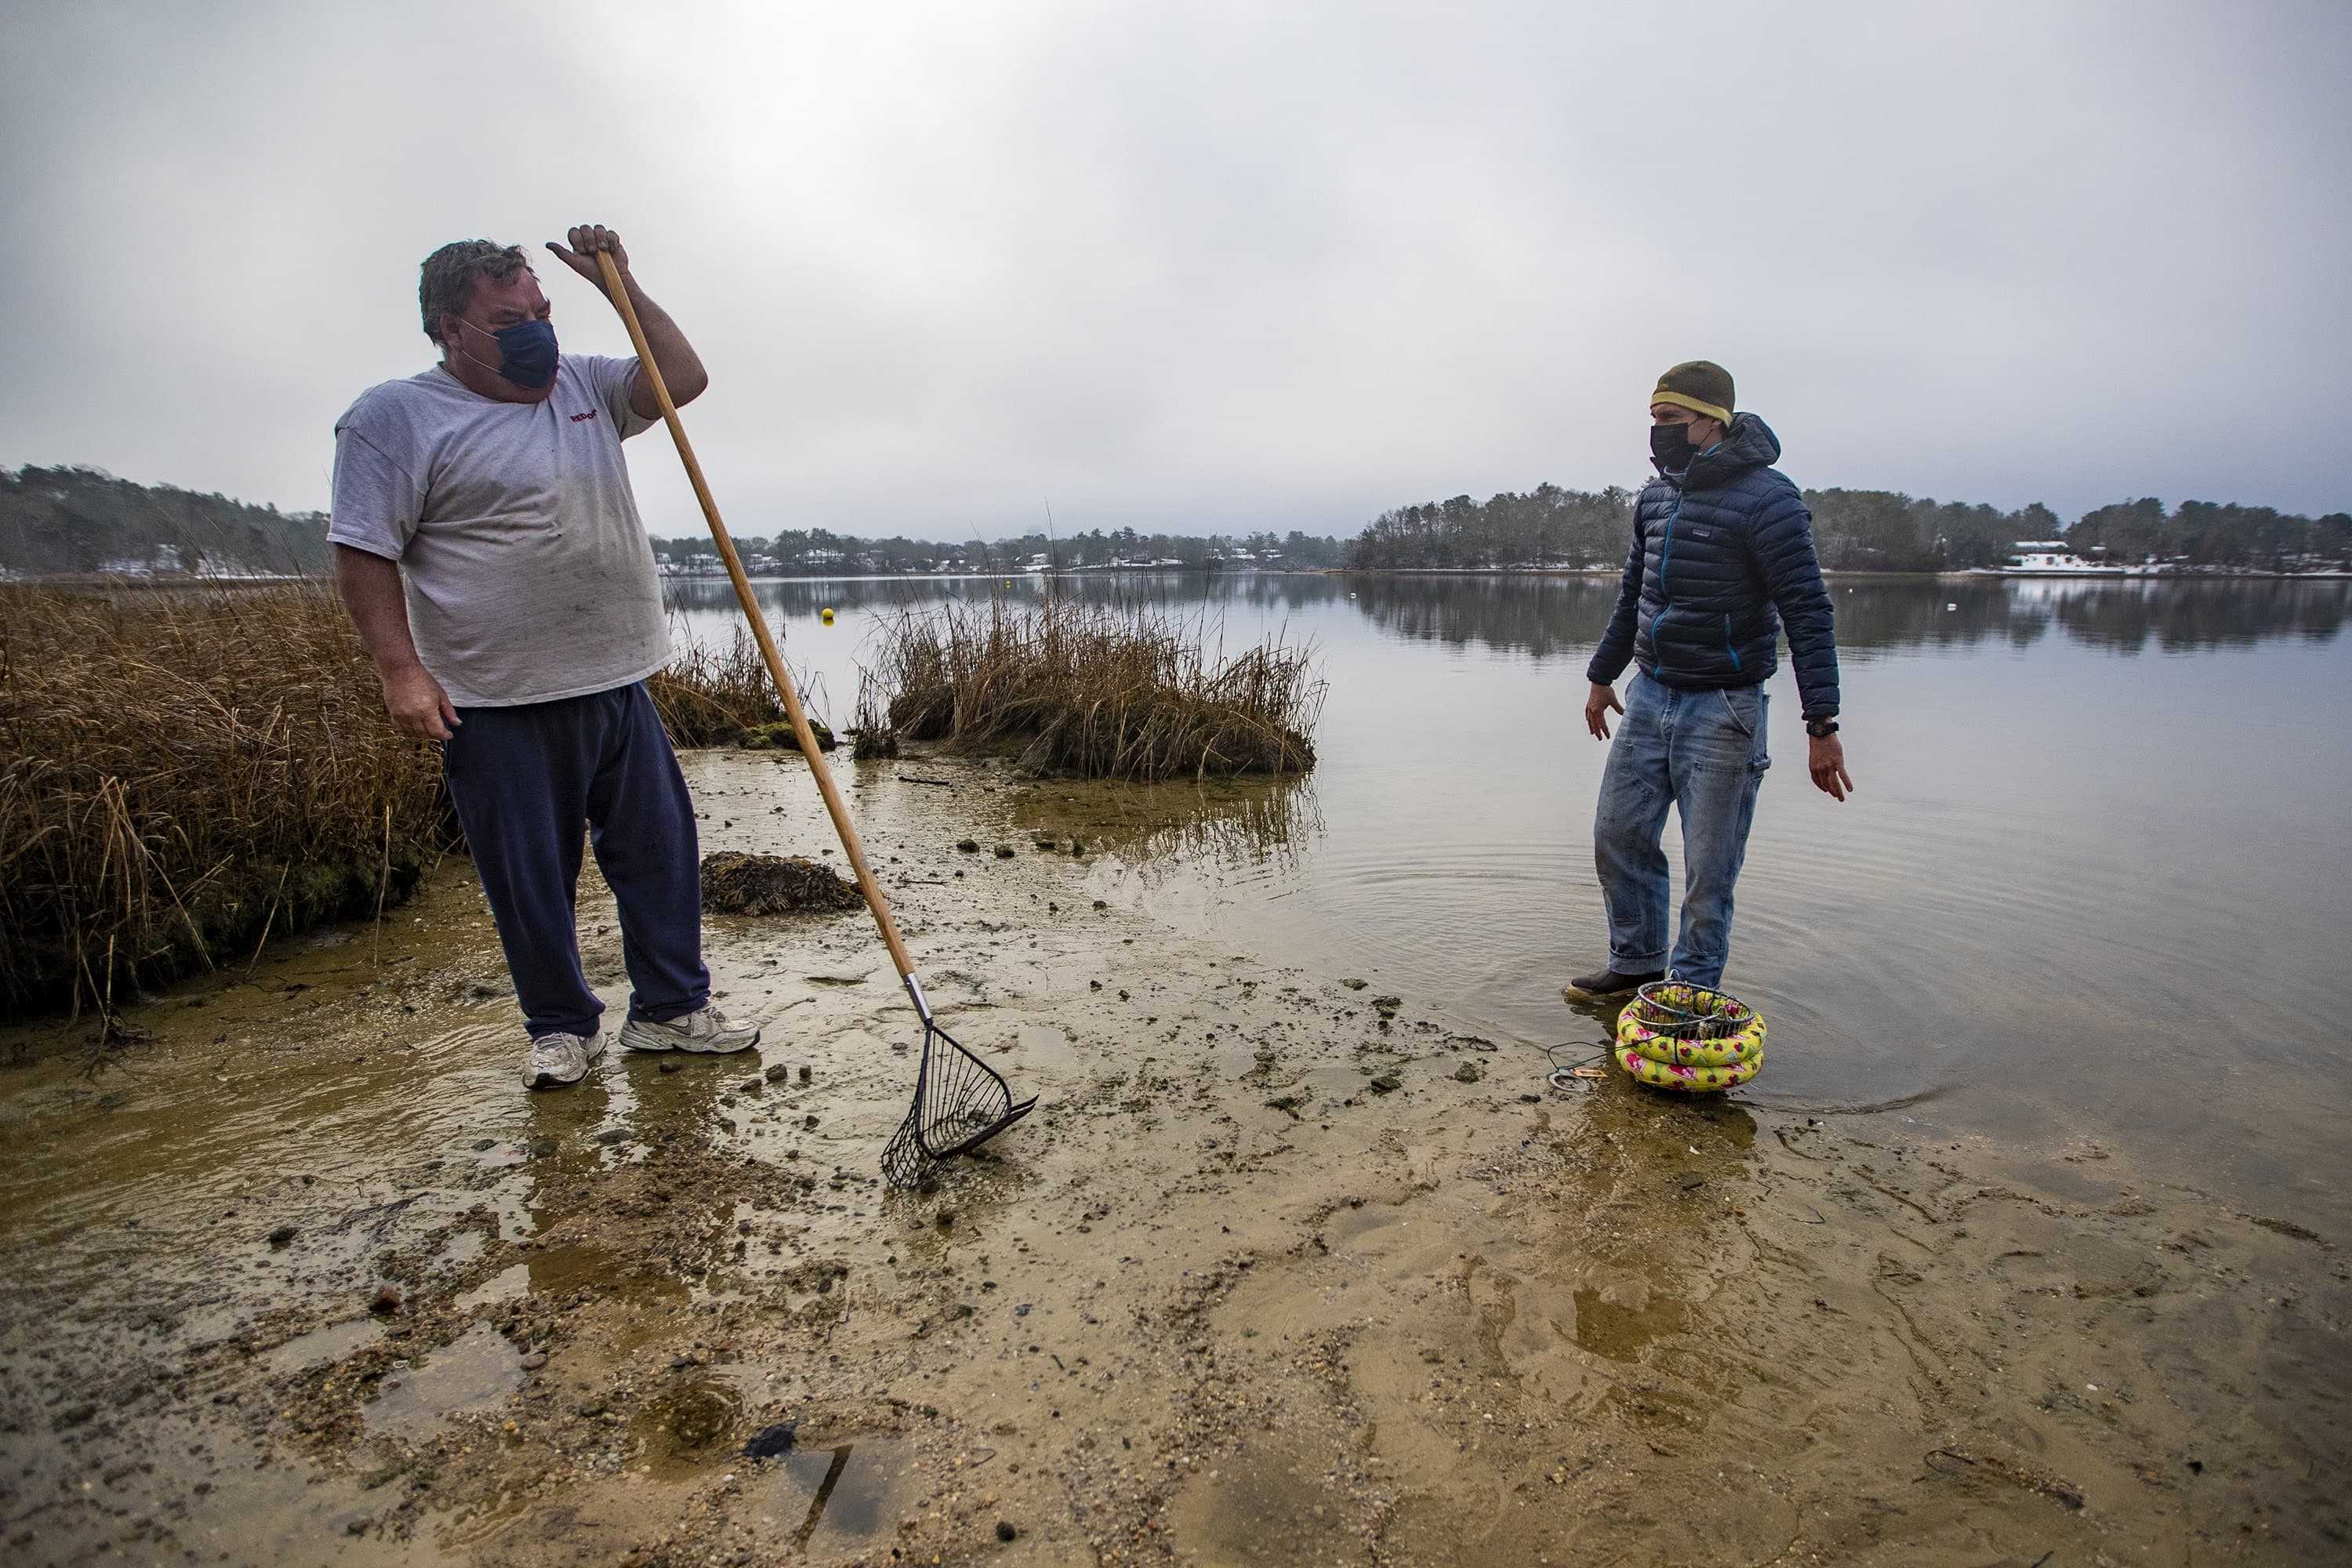 Oyster farmer Bruce Silverbrand, left, and coastal program manager for the Nature Conservancy, Steven Kirk, at Little Buttermilk Bay in Buzzards Bay. (Jesse Costa/WBUR)